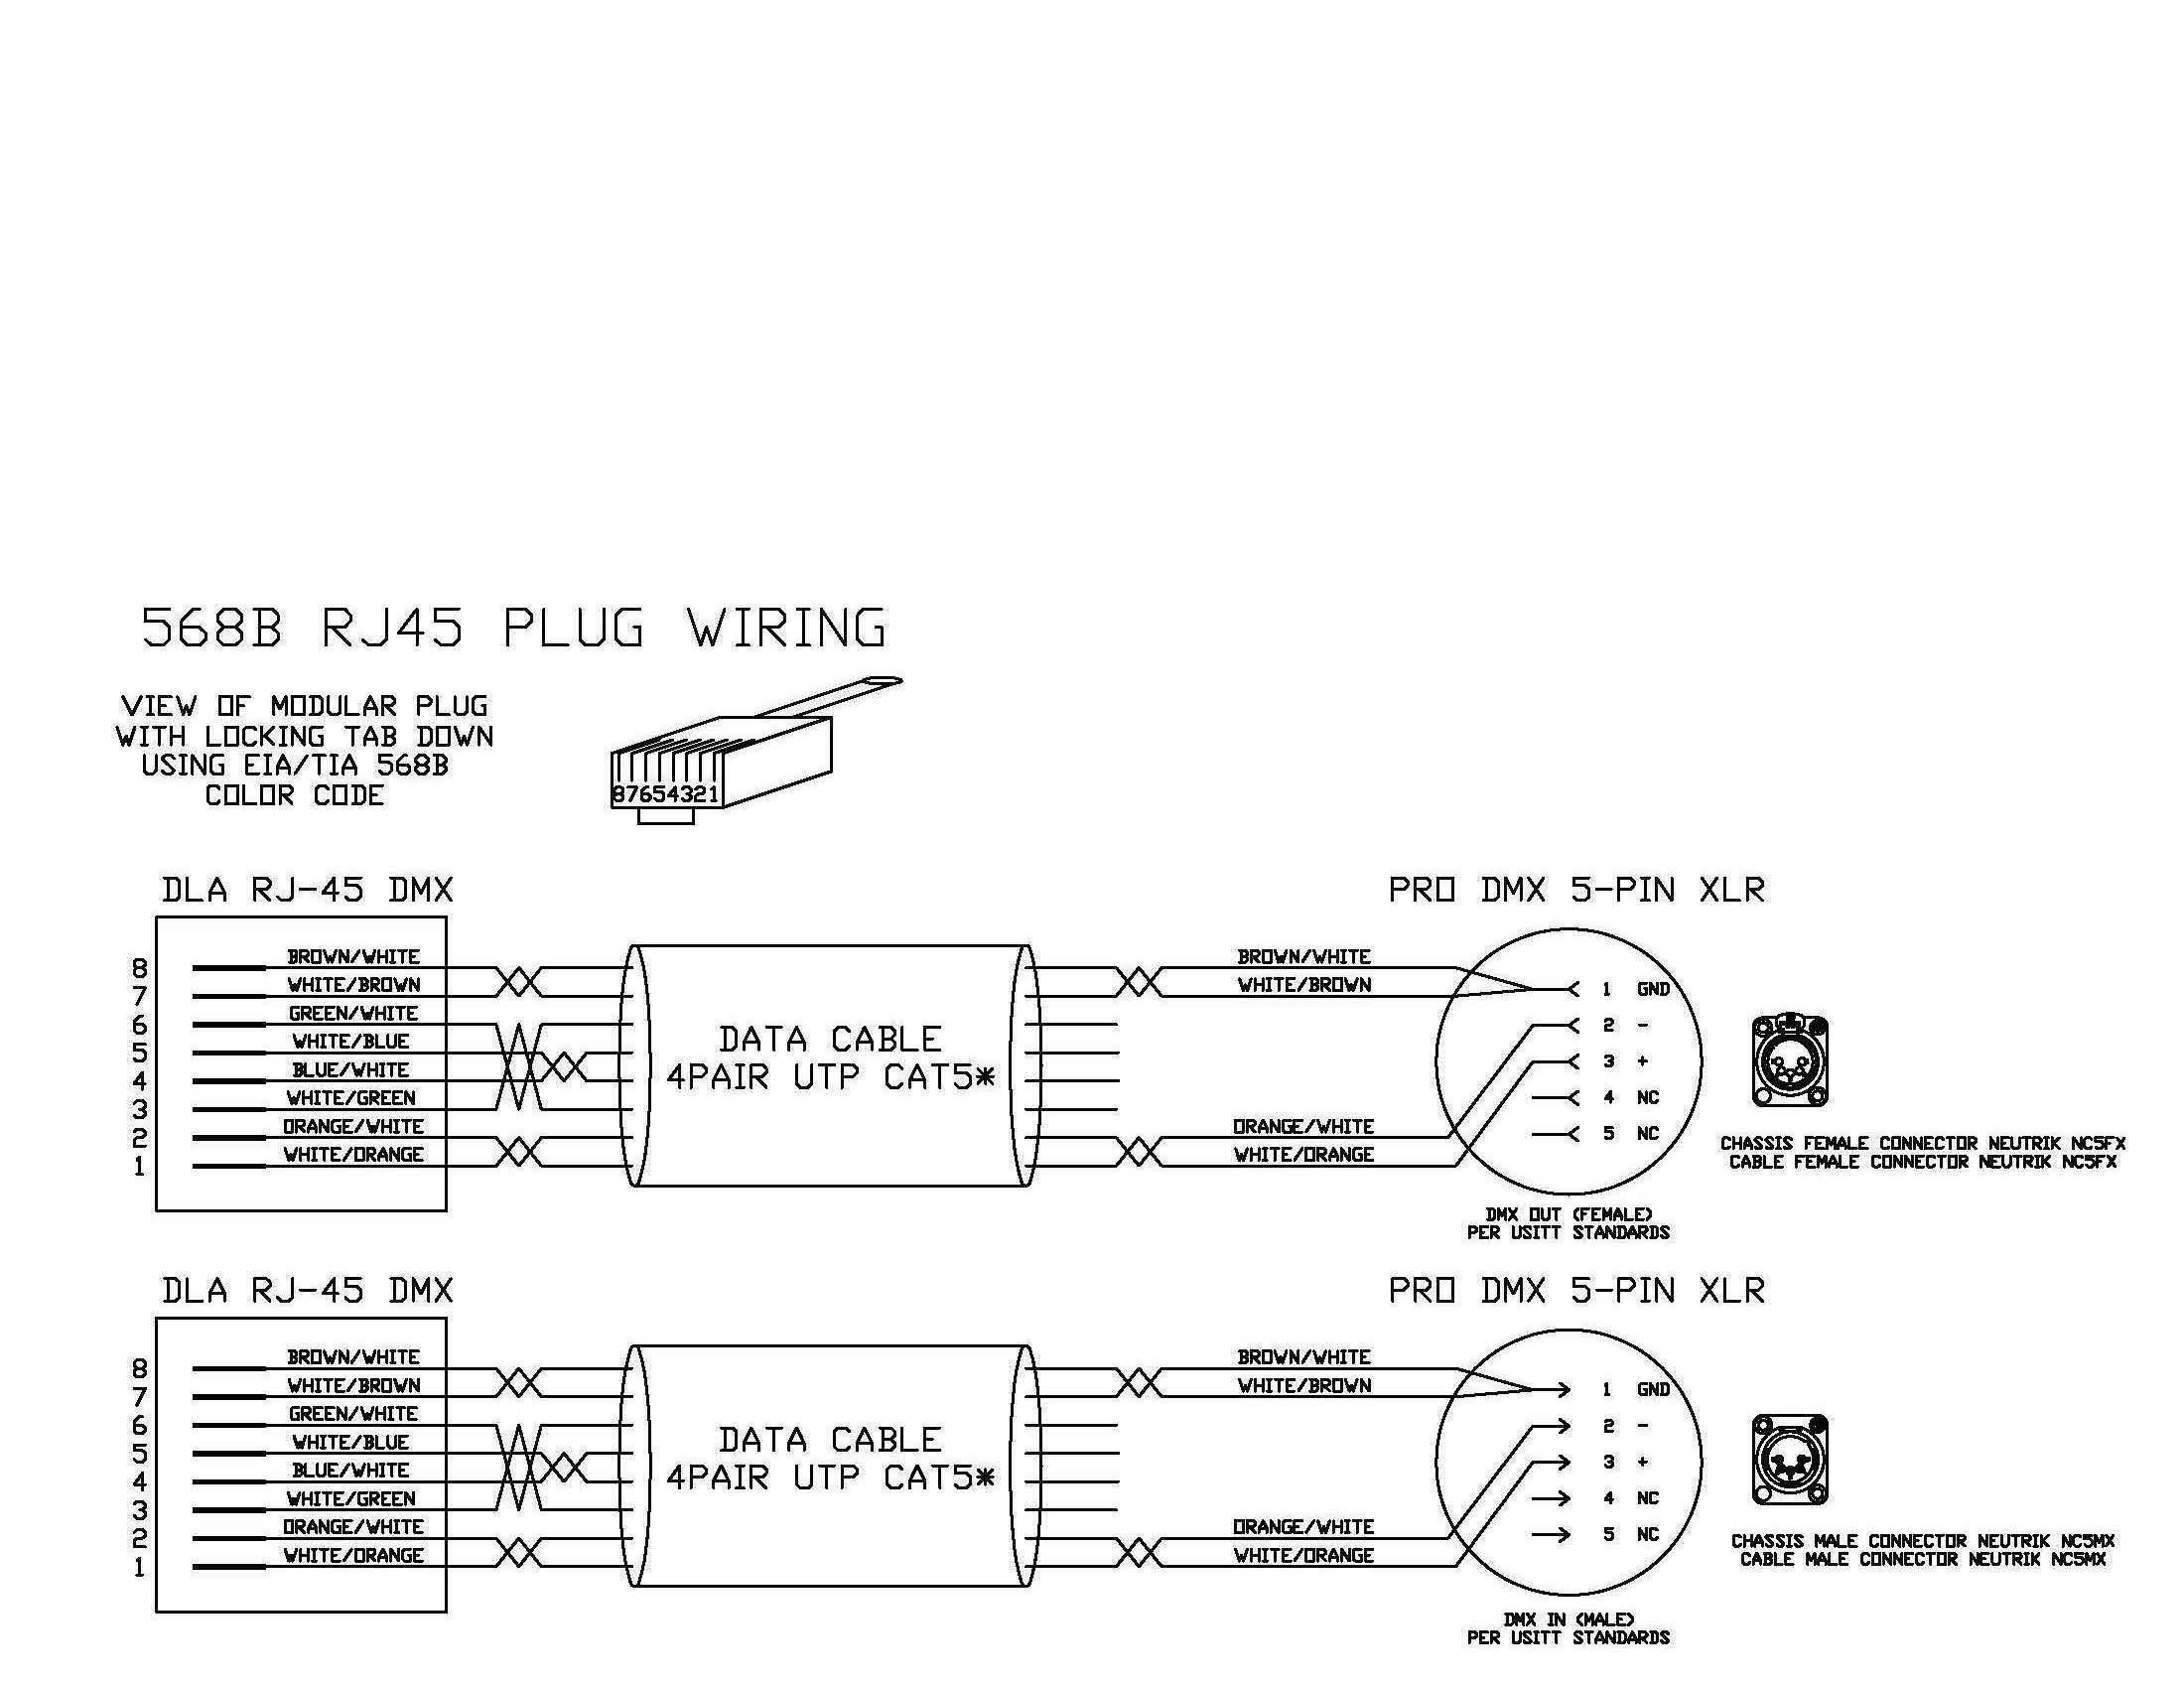 Bose Link Cable Wiring Diagram Book Bose Link Cable Wiring Diagram Valid Xlr To Rj45 Wiring Diagram Xlr